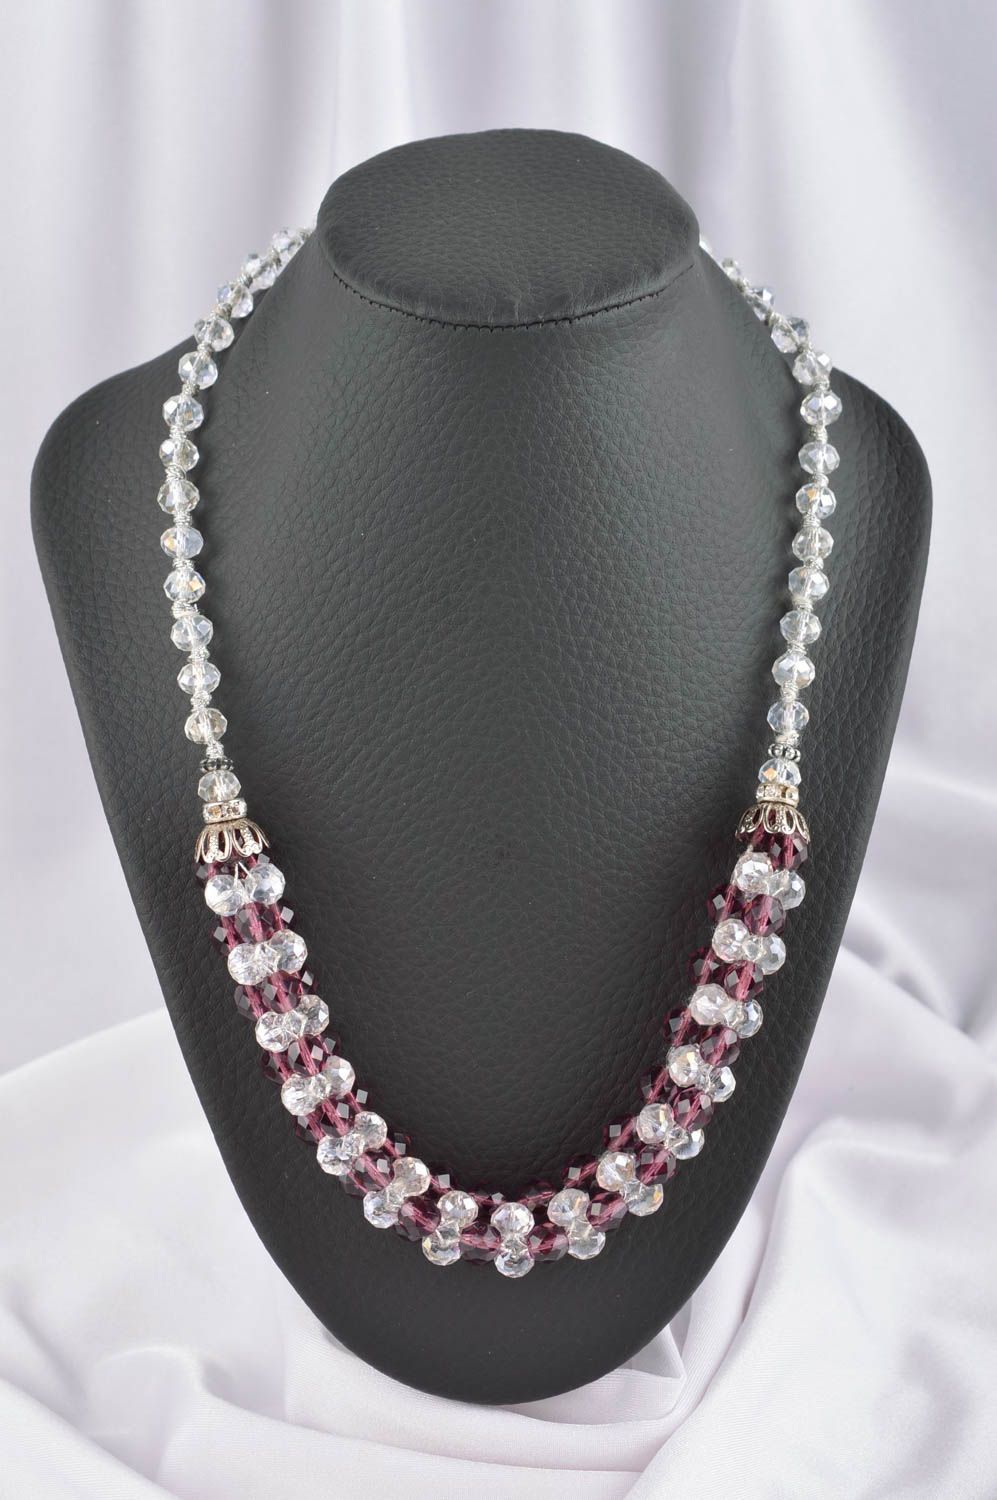 Handmade beaded necklace crystal necklace evening jewelry present for women photo 1